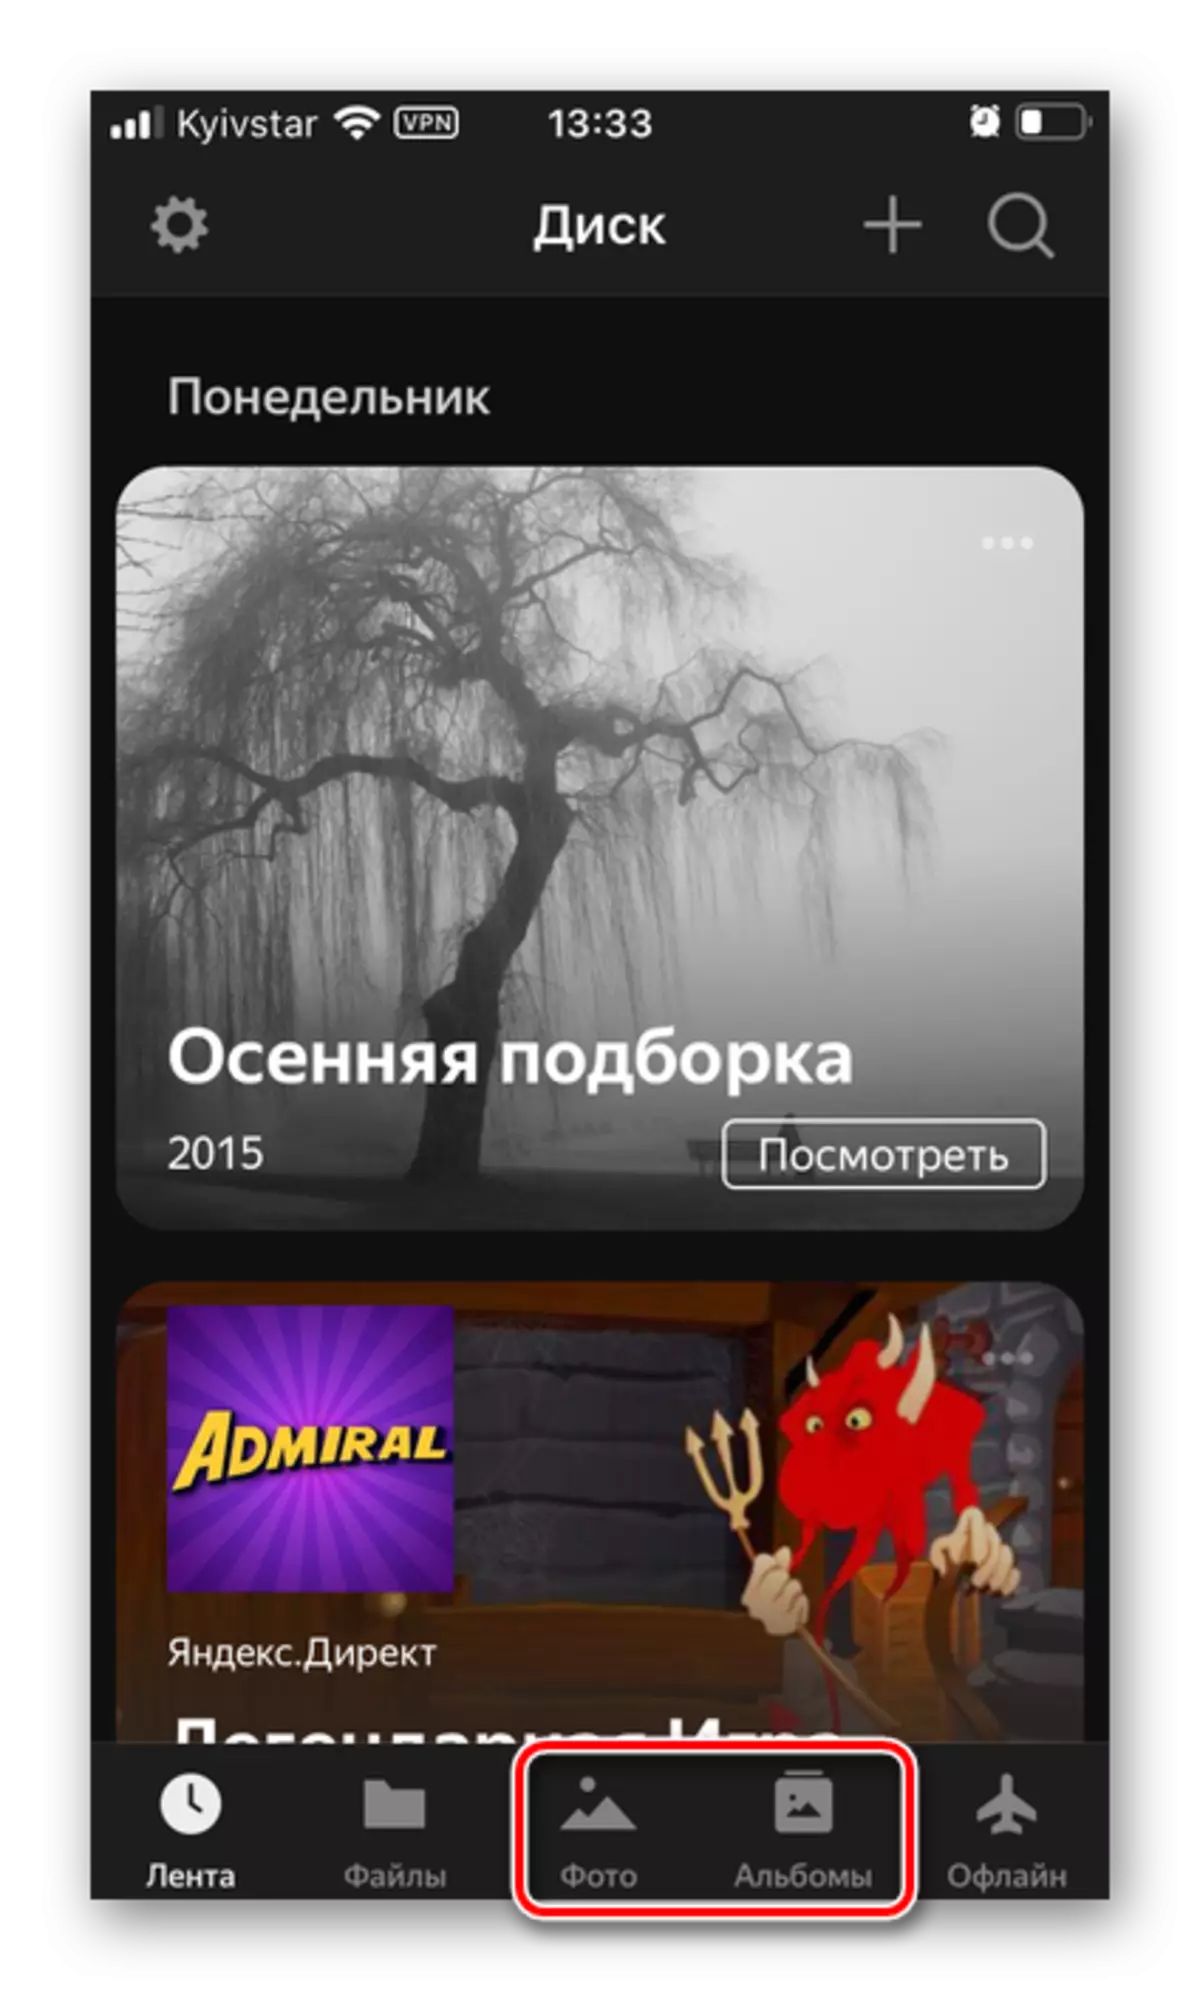 Transition to tab with images in Yandex.Disk on iPhone